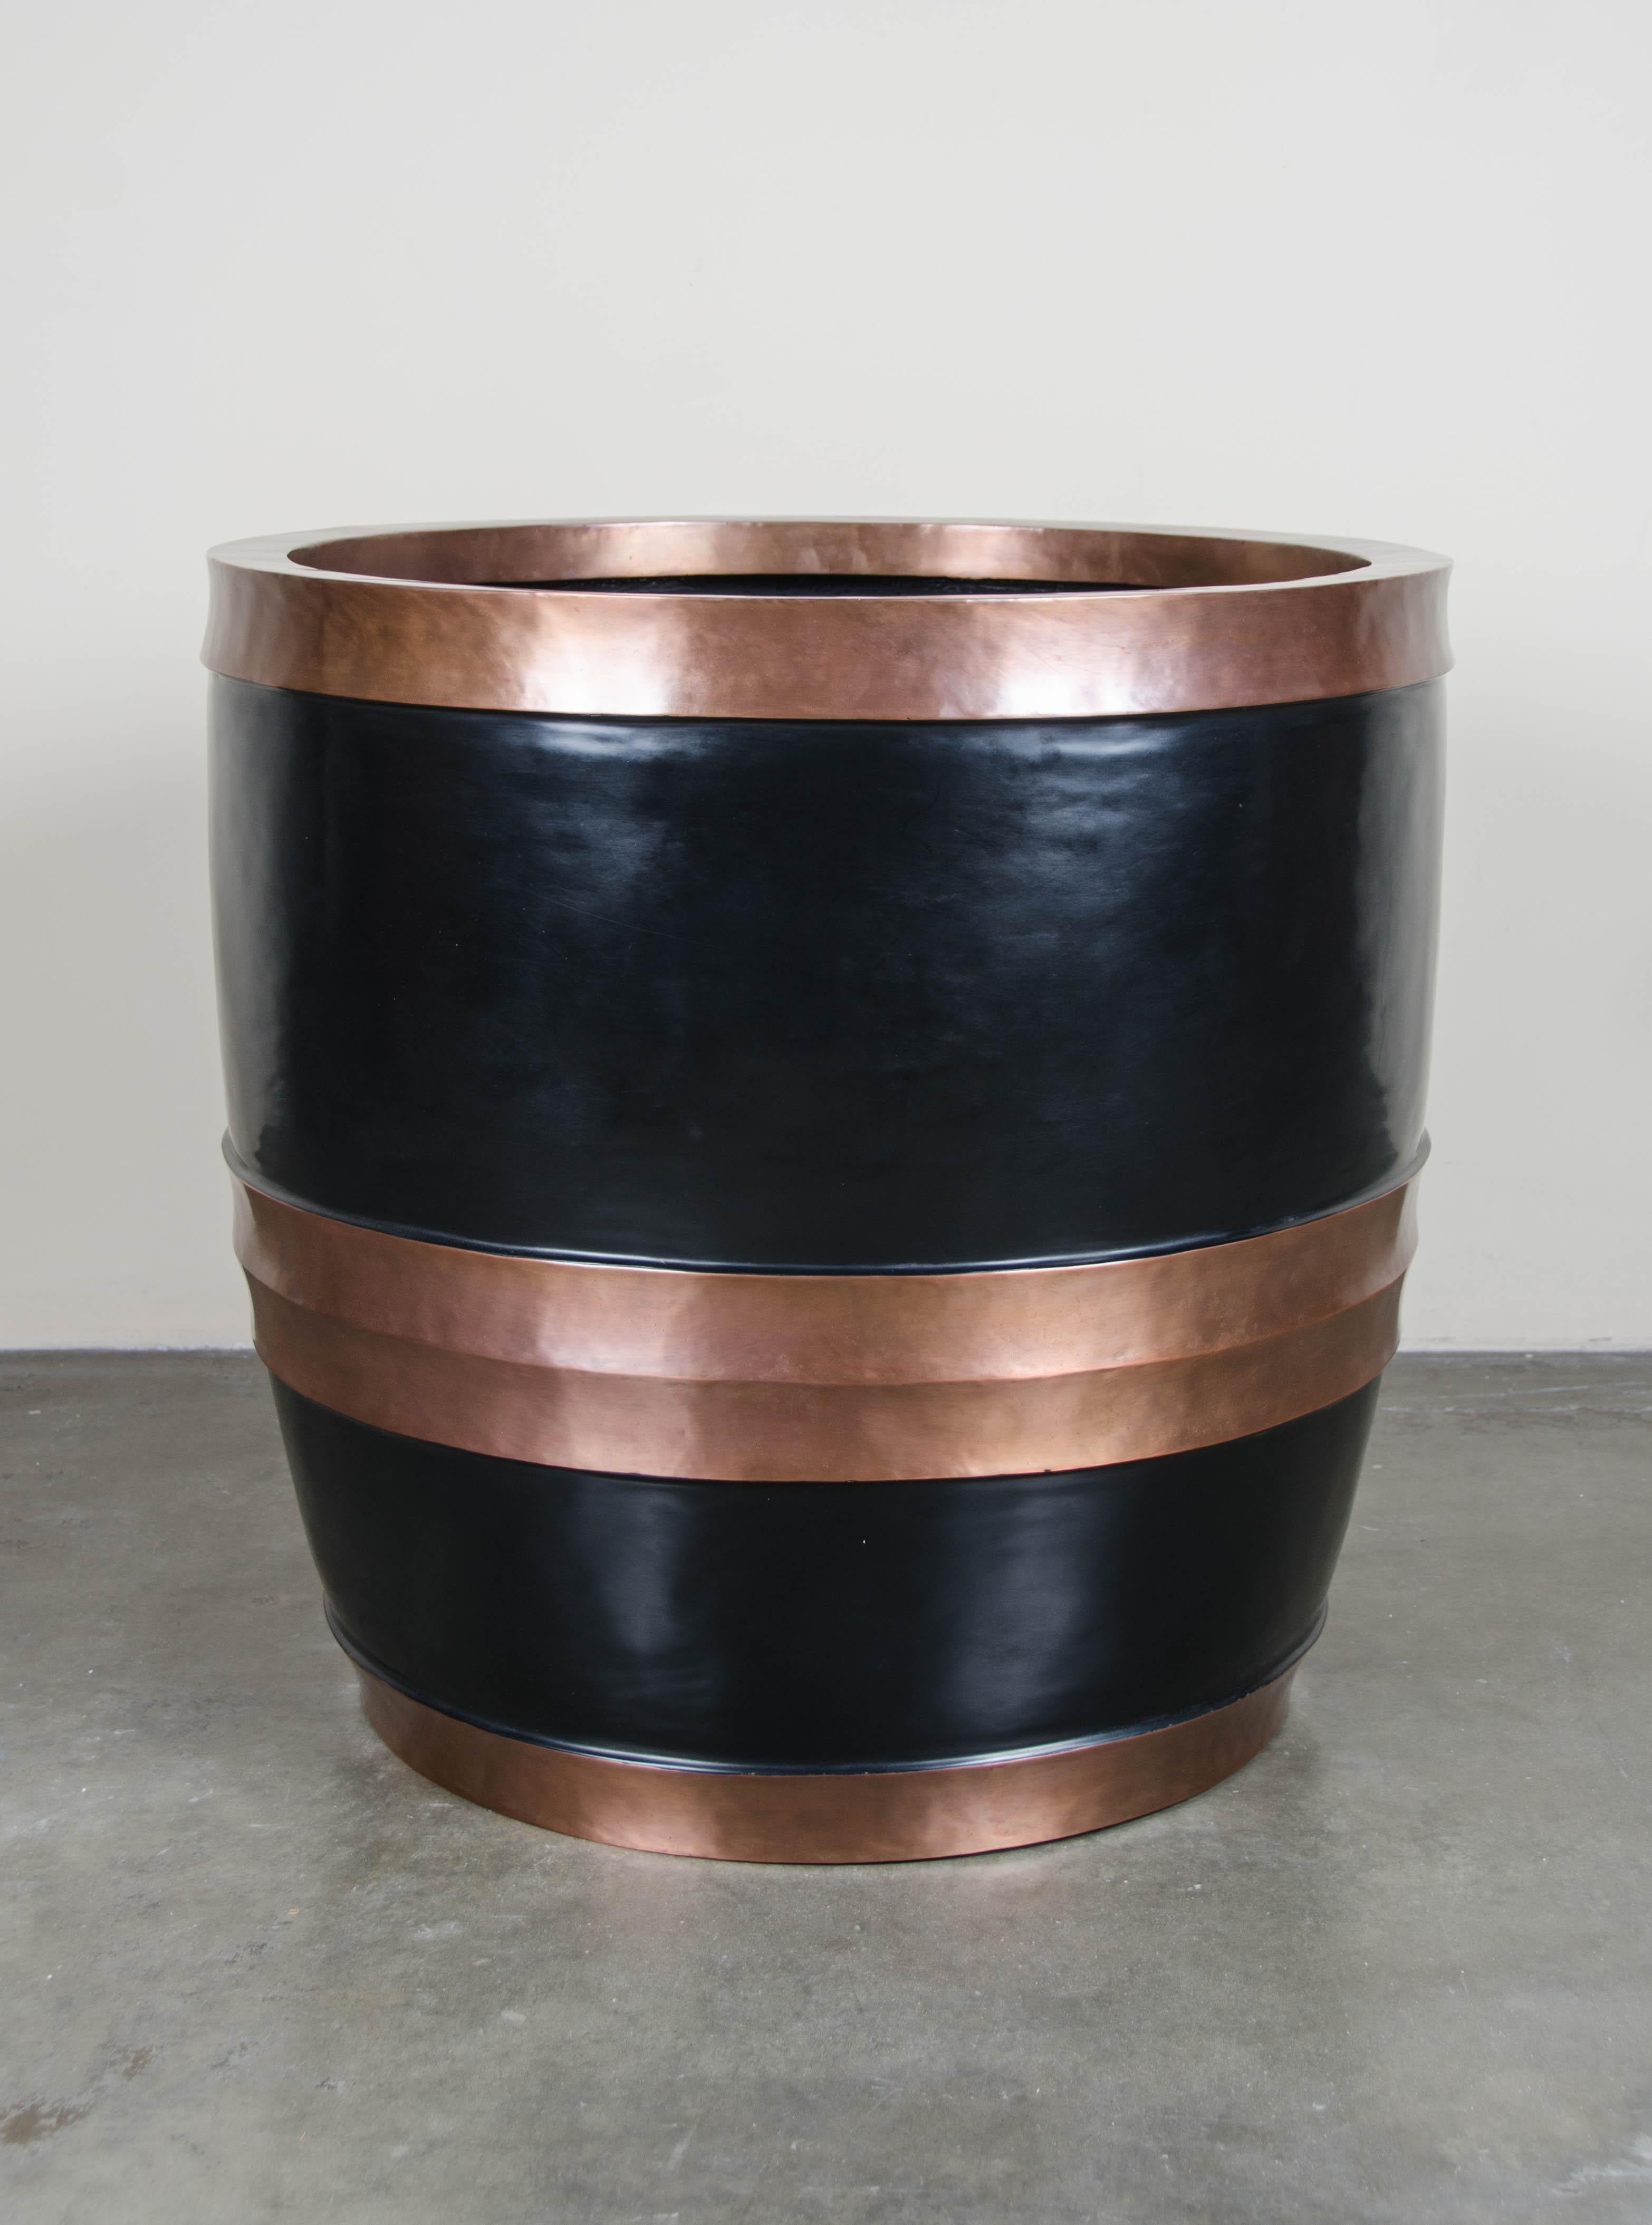 Antique copper finish on copper band
Hand repousse´
Black lacquer
Contemporary
Limited Edition


Chinese lacquer is a highly regarded art form and the earliest example dates back to the Shang Dynasty, circa 1600-1100 B.C. The term lacquer refers to